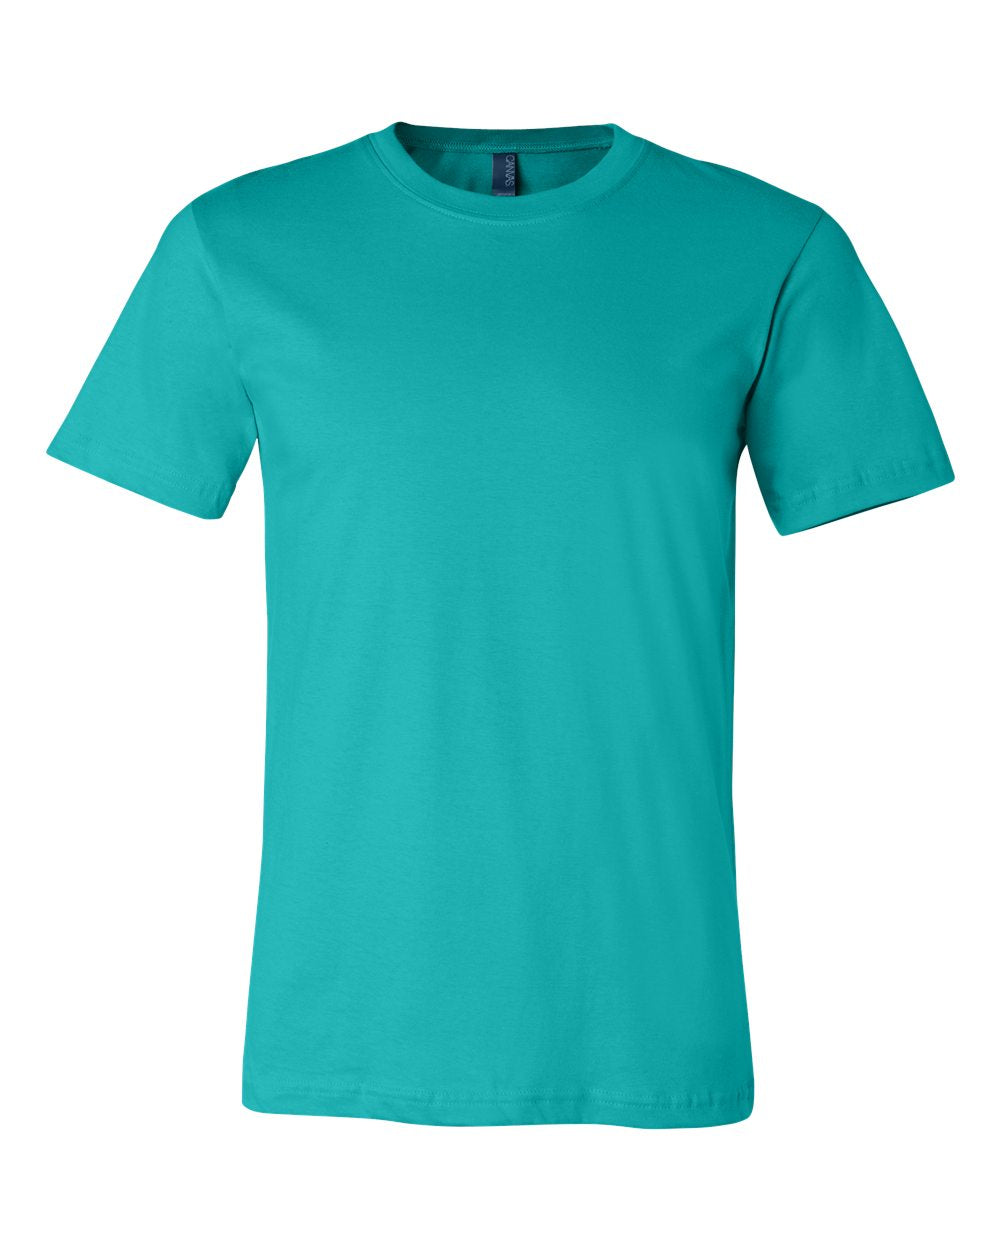 Bella + Canvas Cotton Tee (3001) in Teal